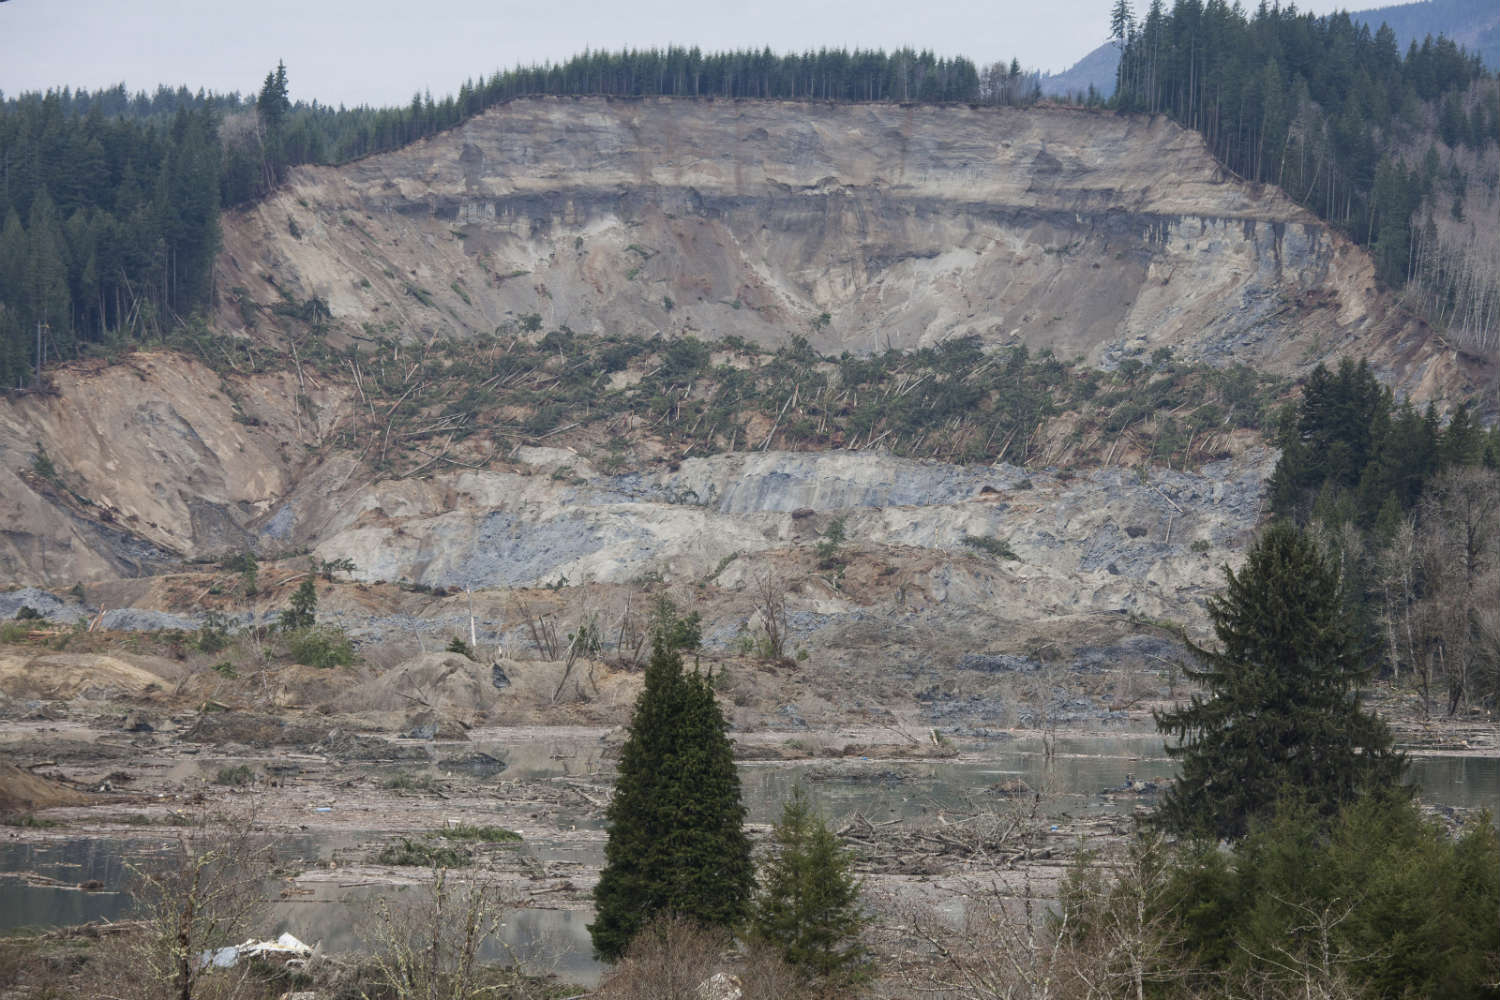 A massive landslide near Oso, Washington killed at least 16 people, with far more still missing (Photo by David Ryder/Getty Images)